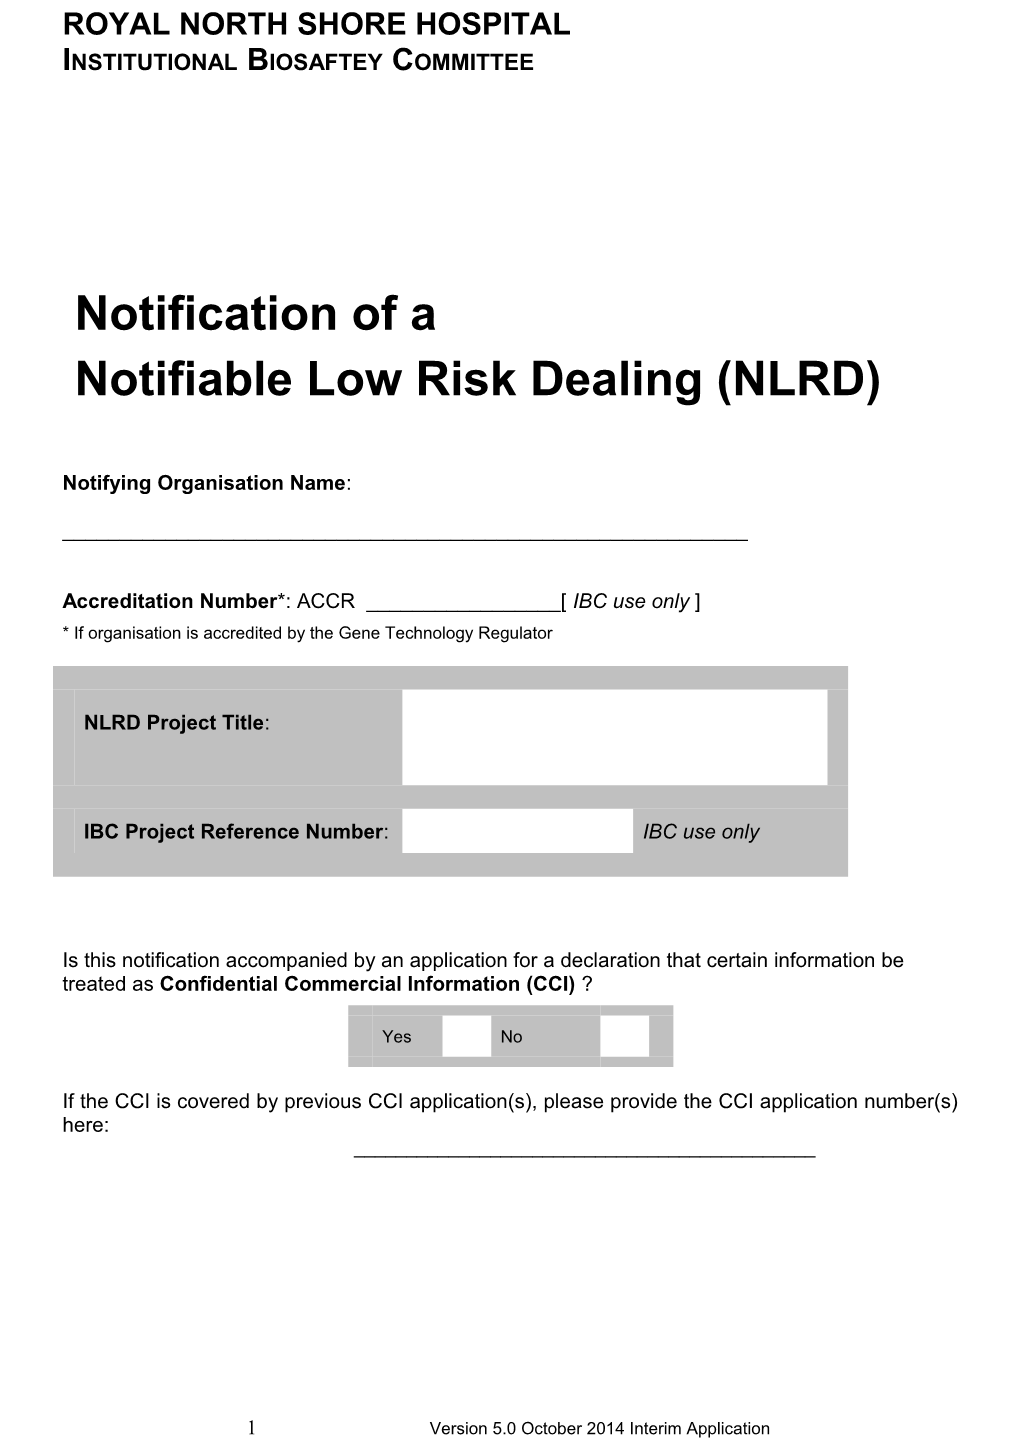 Notification of a Notifiable Low Risk Dealing